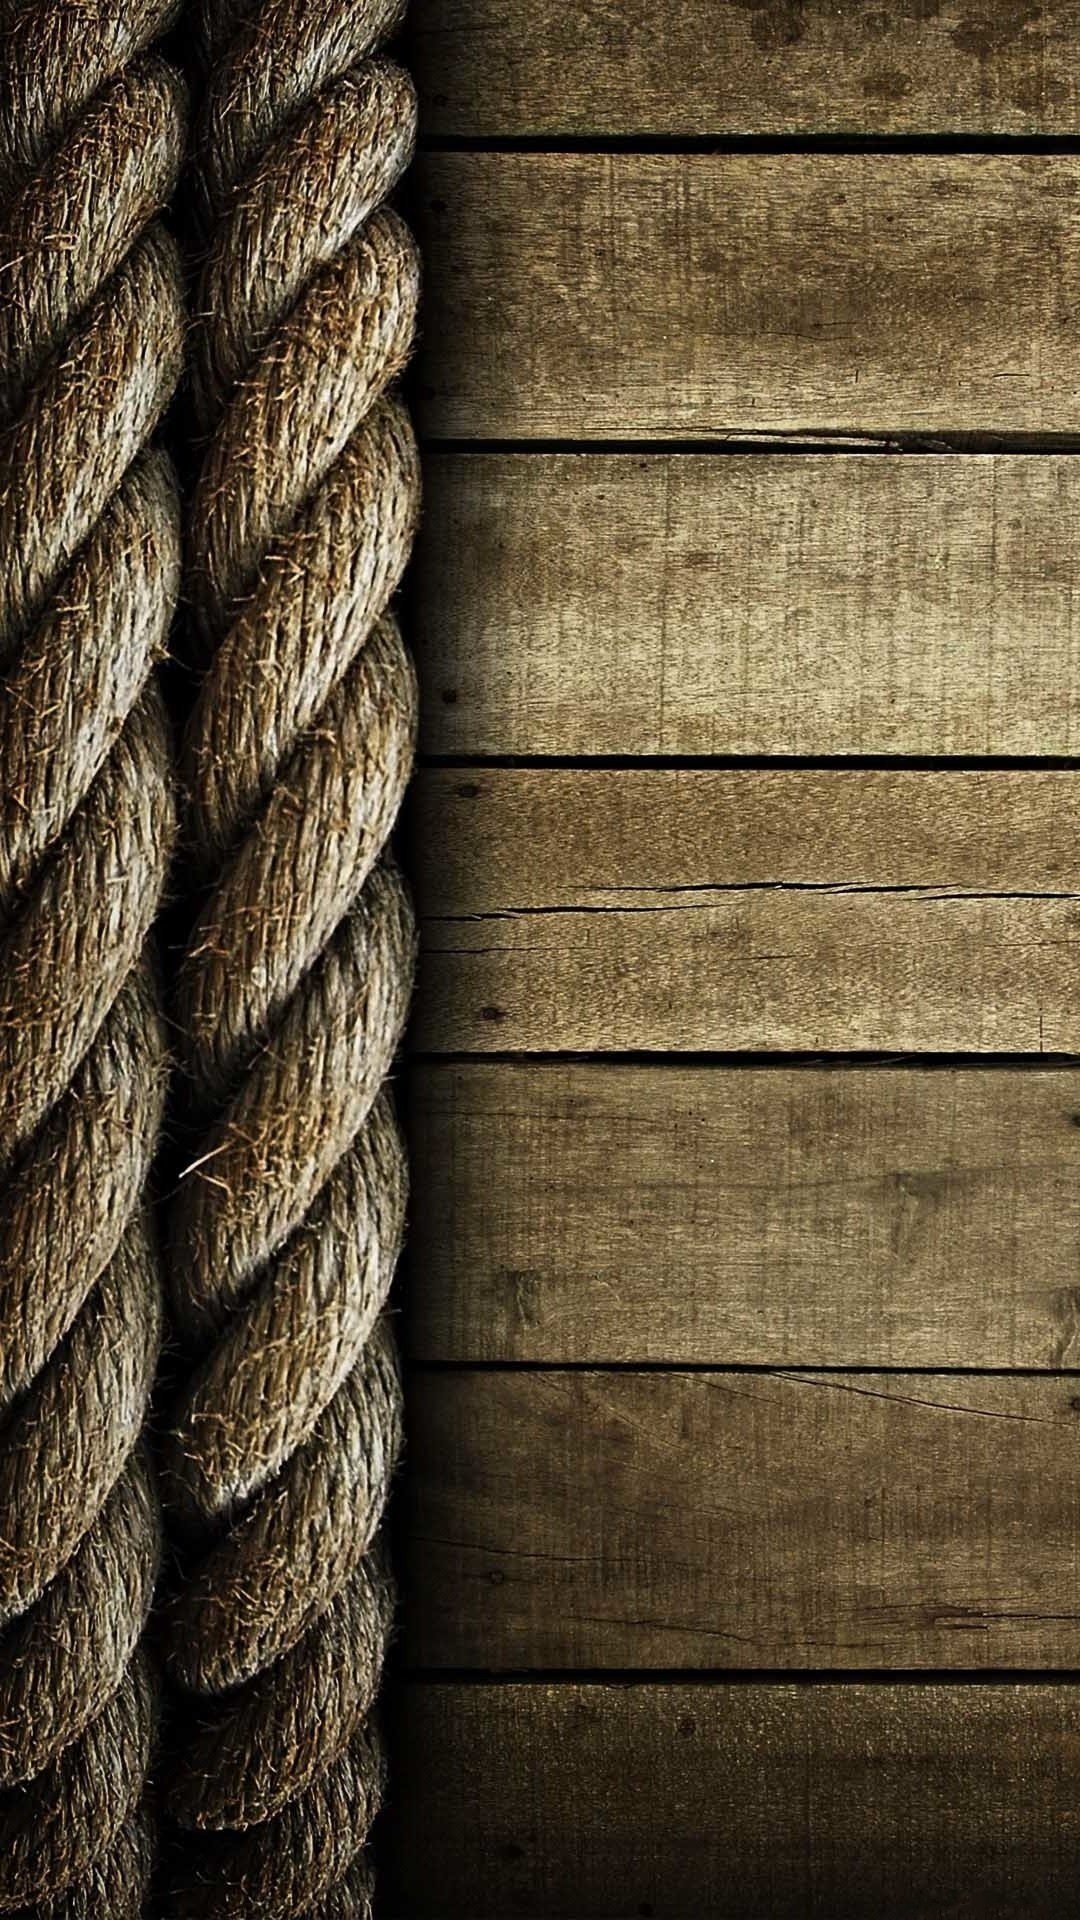 portrait display, Minimalism, Ropes, Wood, Wooden surface, Planks Wallpaper